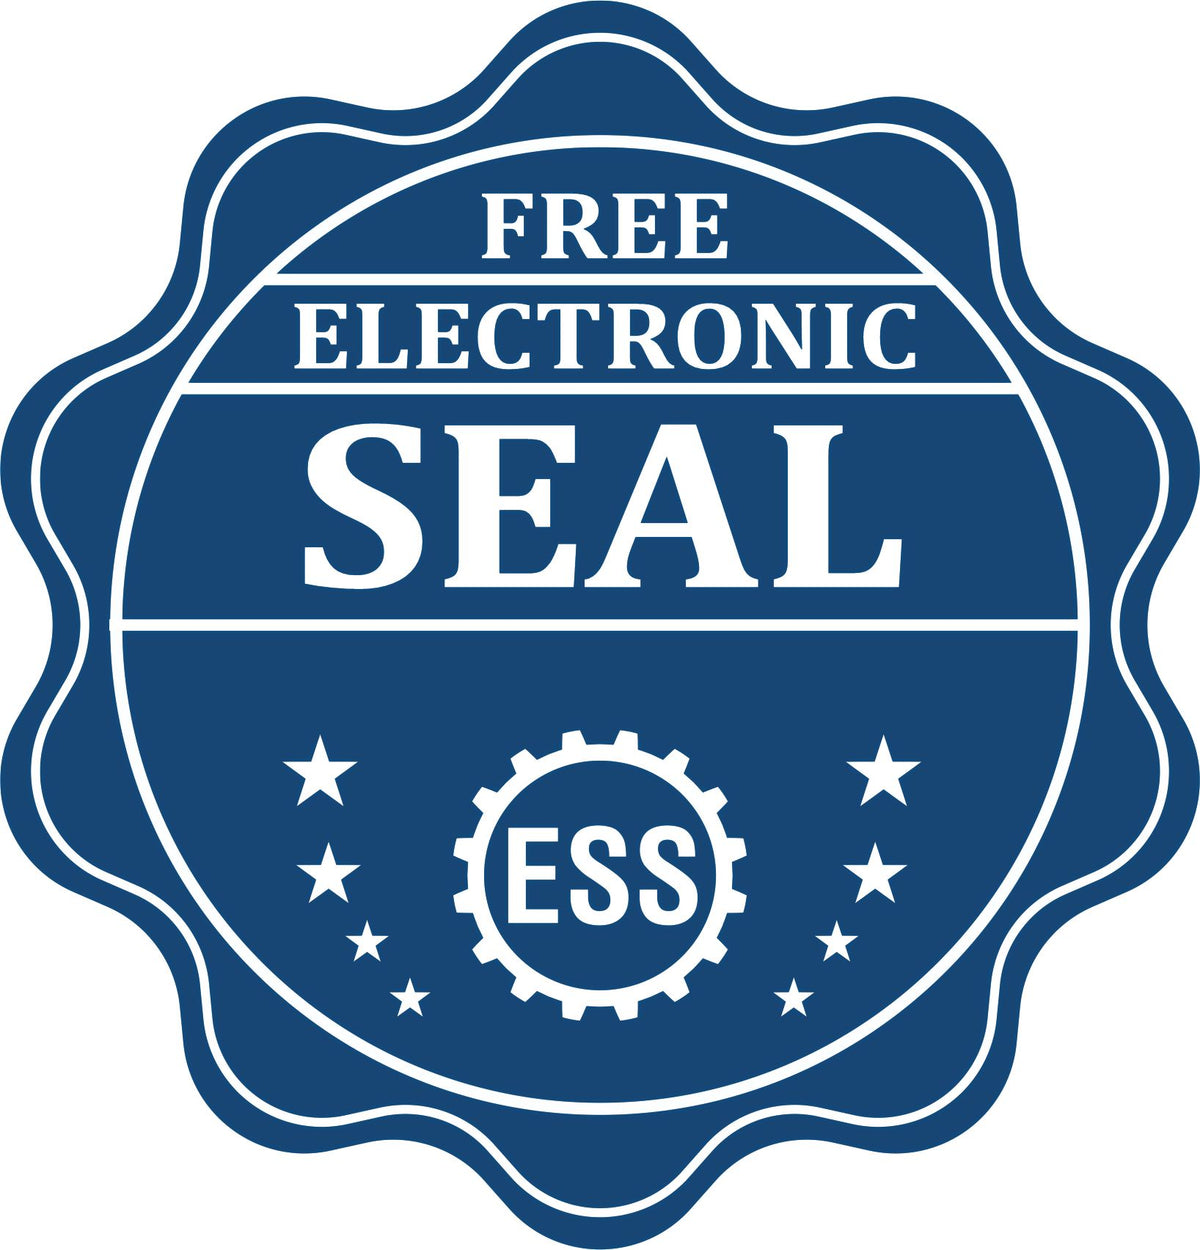 A badge showing a free electronic seal for the Hybrid Nevada Landscape Architect Seal with stars and the ESS gear on the emblem.